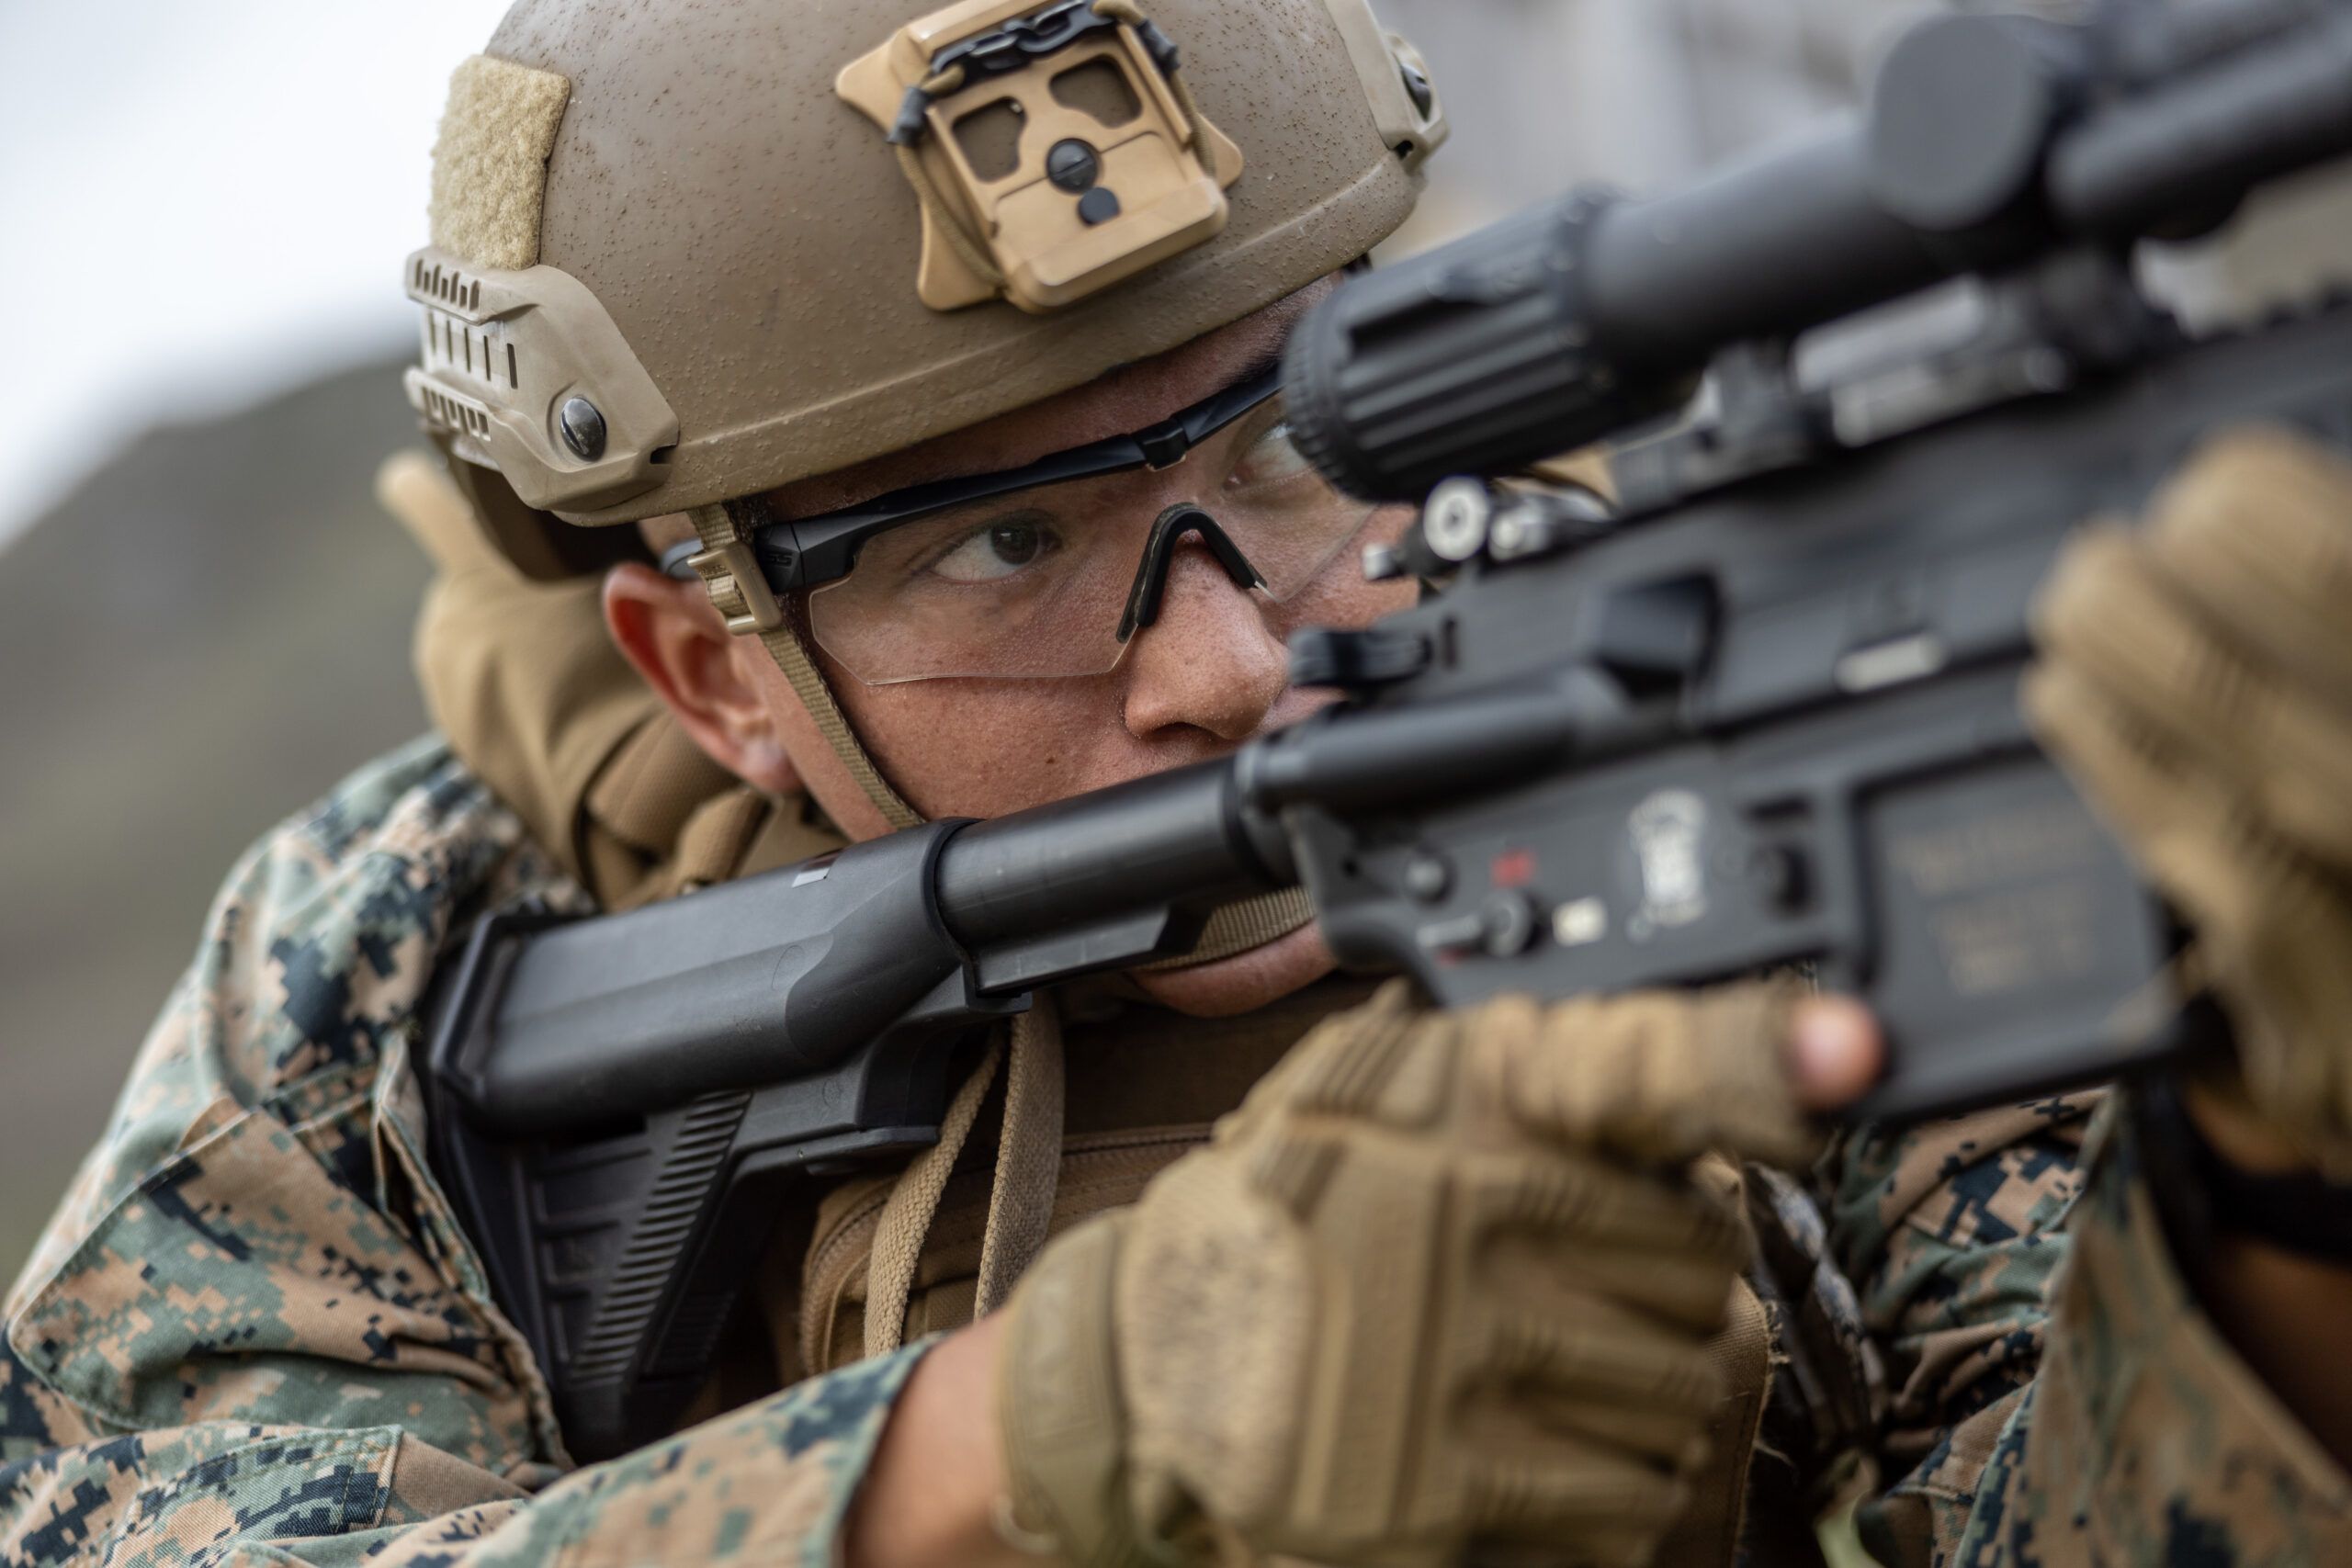 US Marine in digital camouflage uniform and body armor sighting in with his Infantry Automatic Rifle during a training exercise.